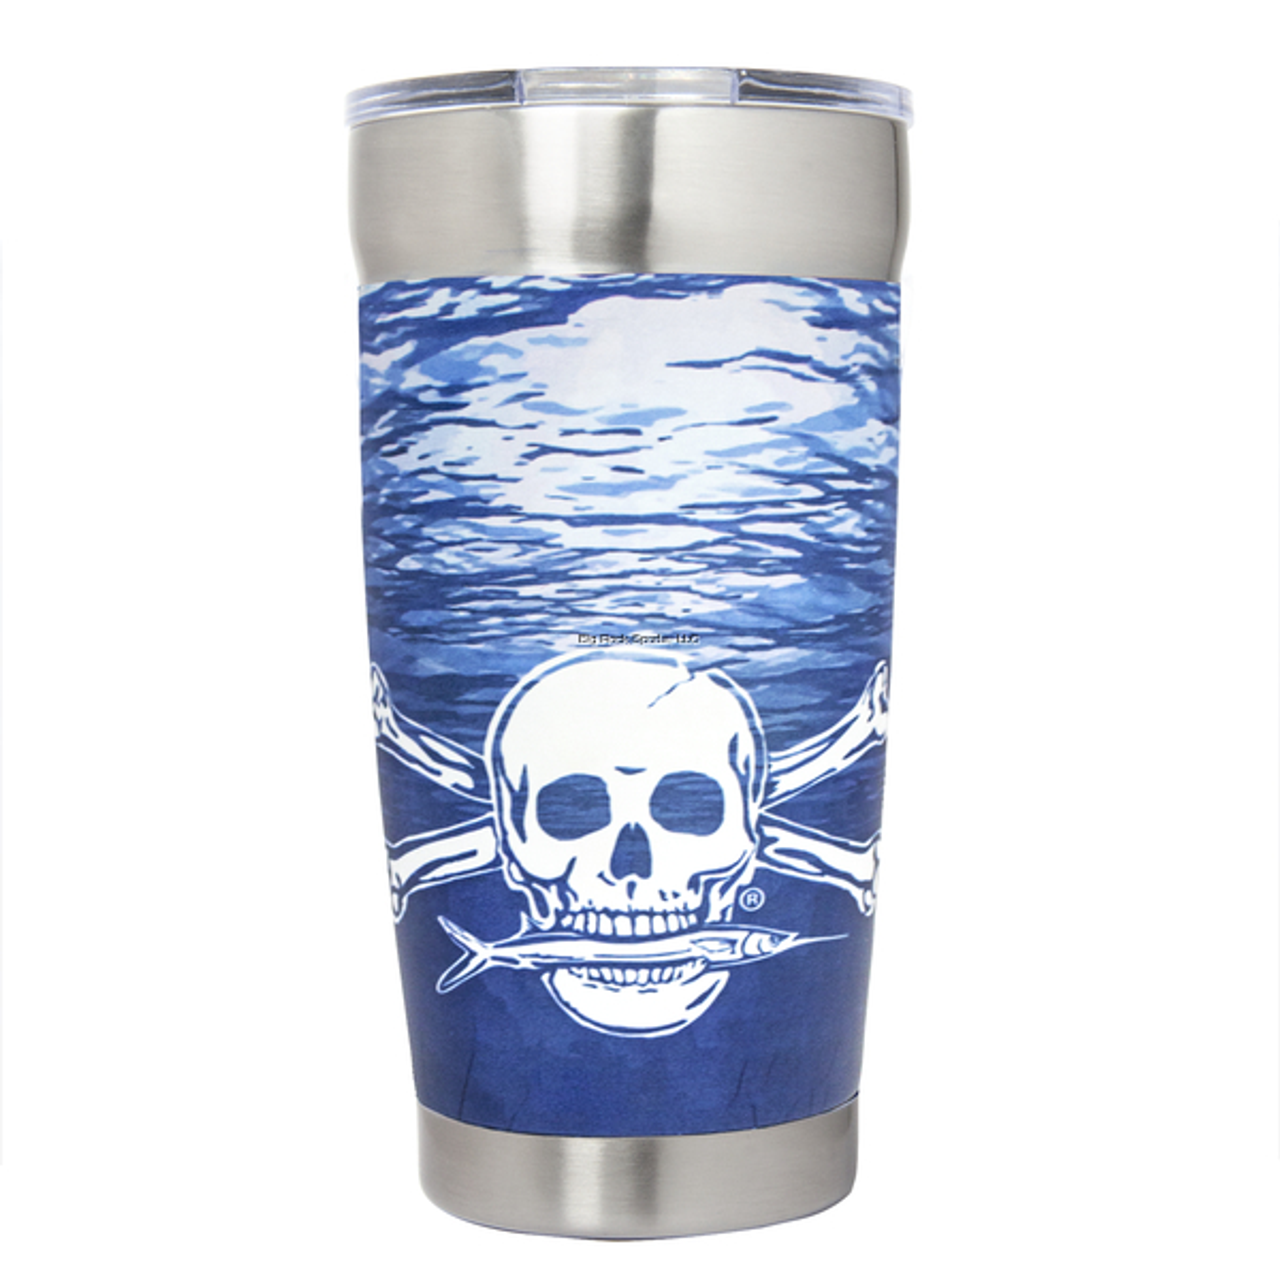 Calcutta Stainless Steel Double Wall Vacuum Seal Traveler Cup 20oz w/Lid Water pattern with Skull